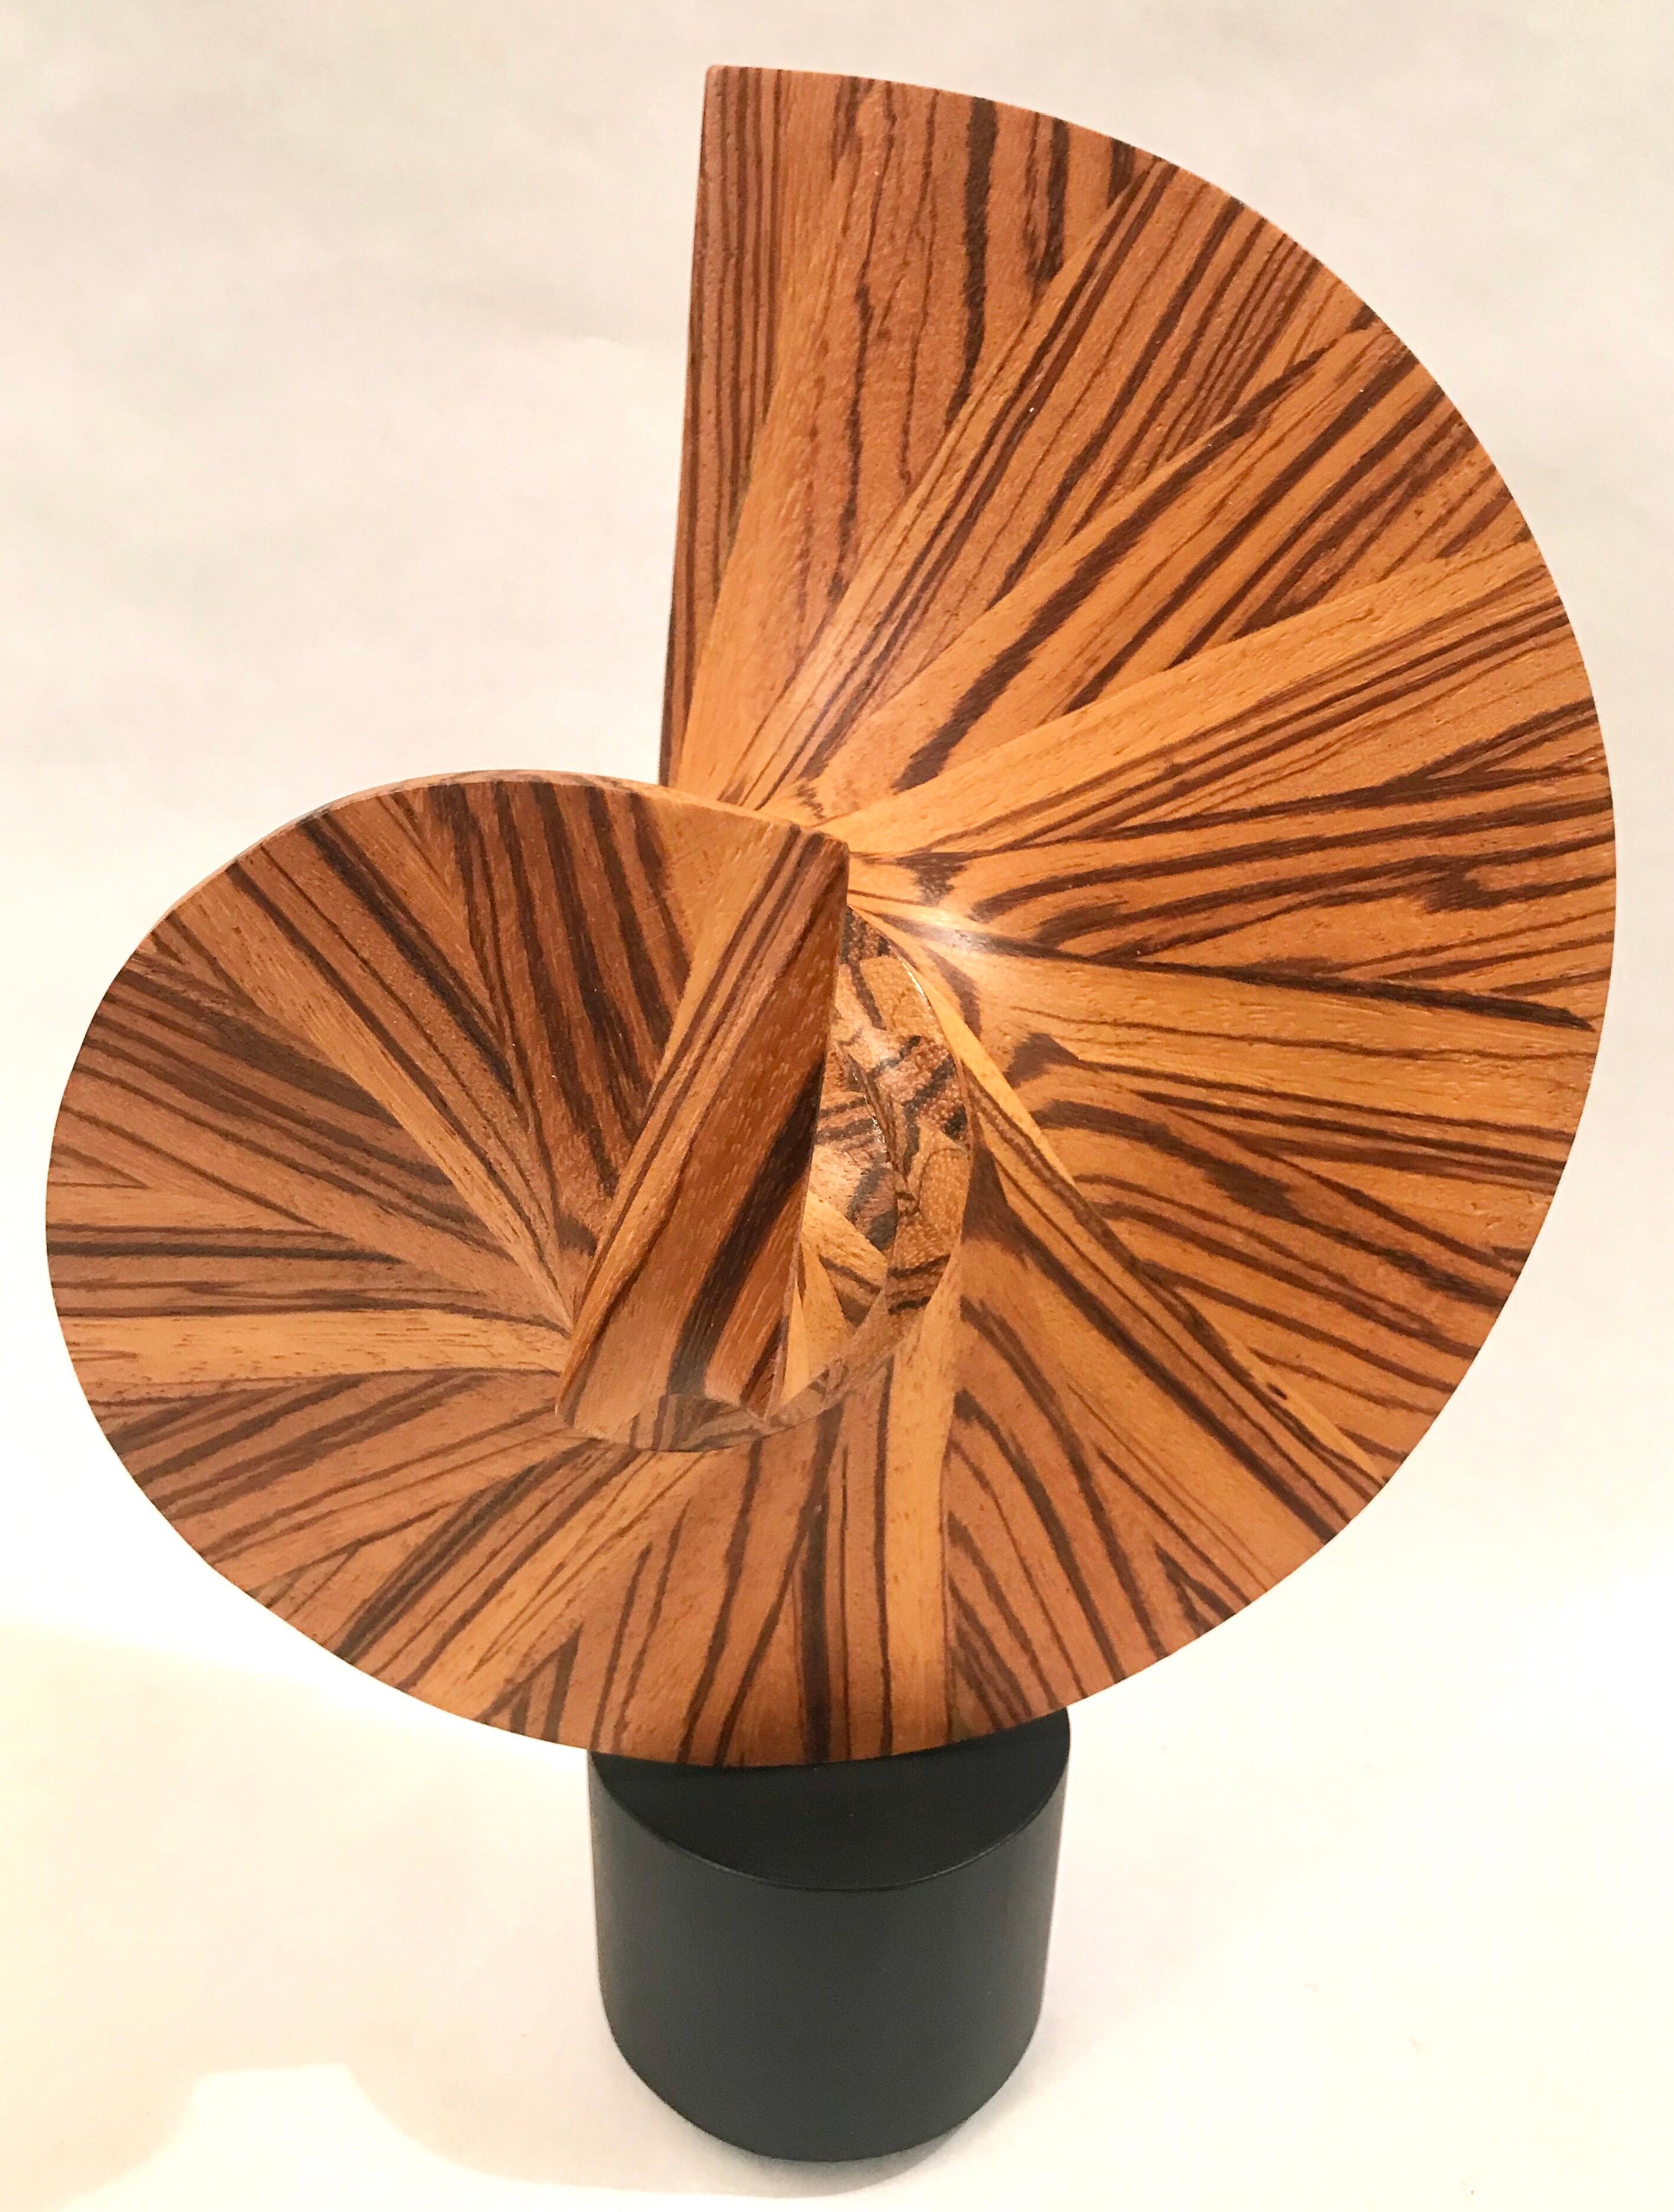 Late 20th Century Wood Sculpture J B Veiner, 1989 For Sale